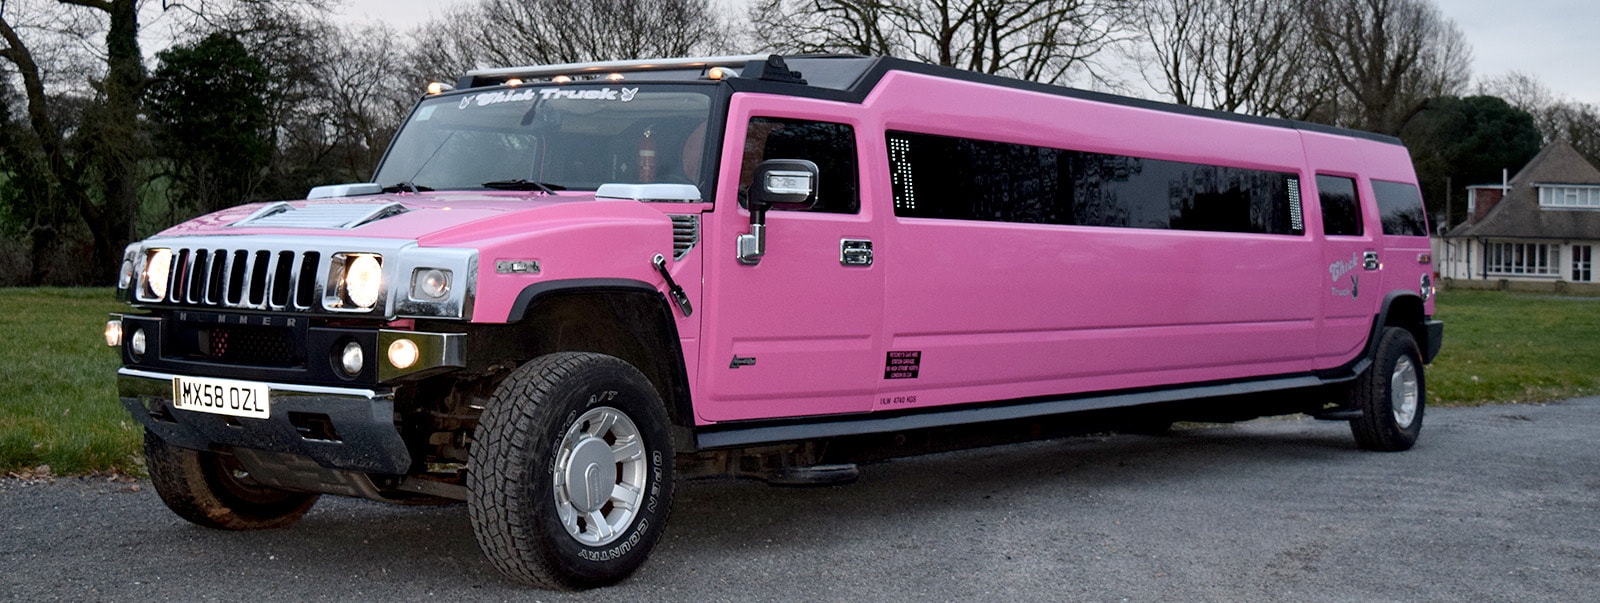 Pink Hummer Limo Hire Stockport